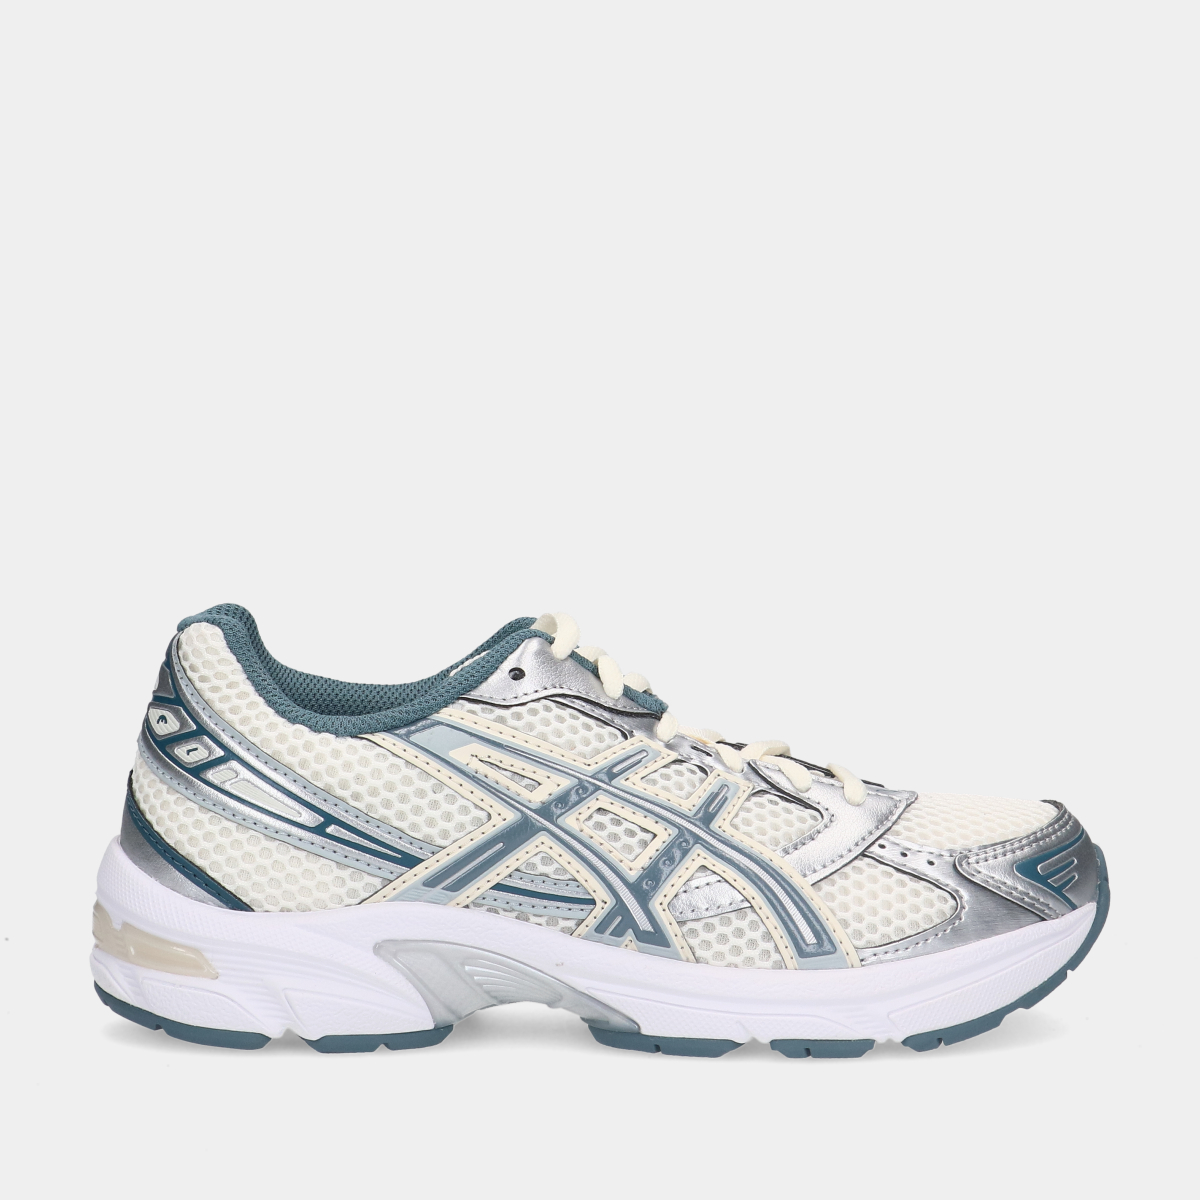 Asics GEL-1130 Off White/ Ironclad dames sneakers
